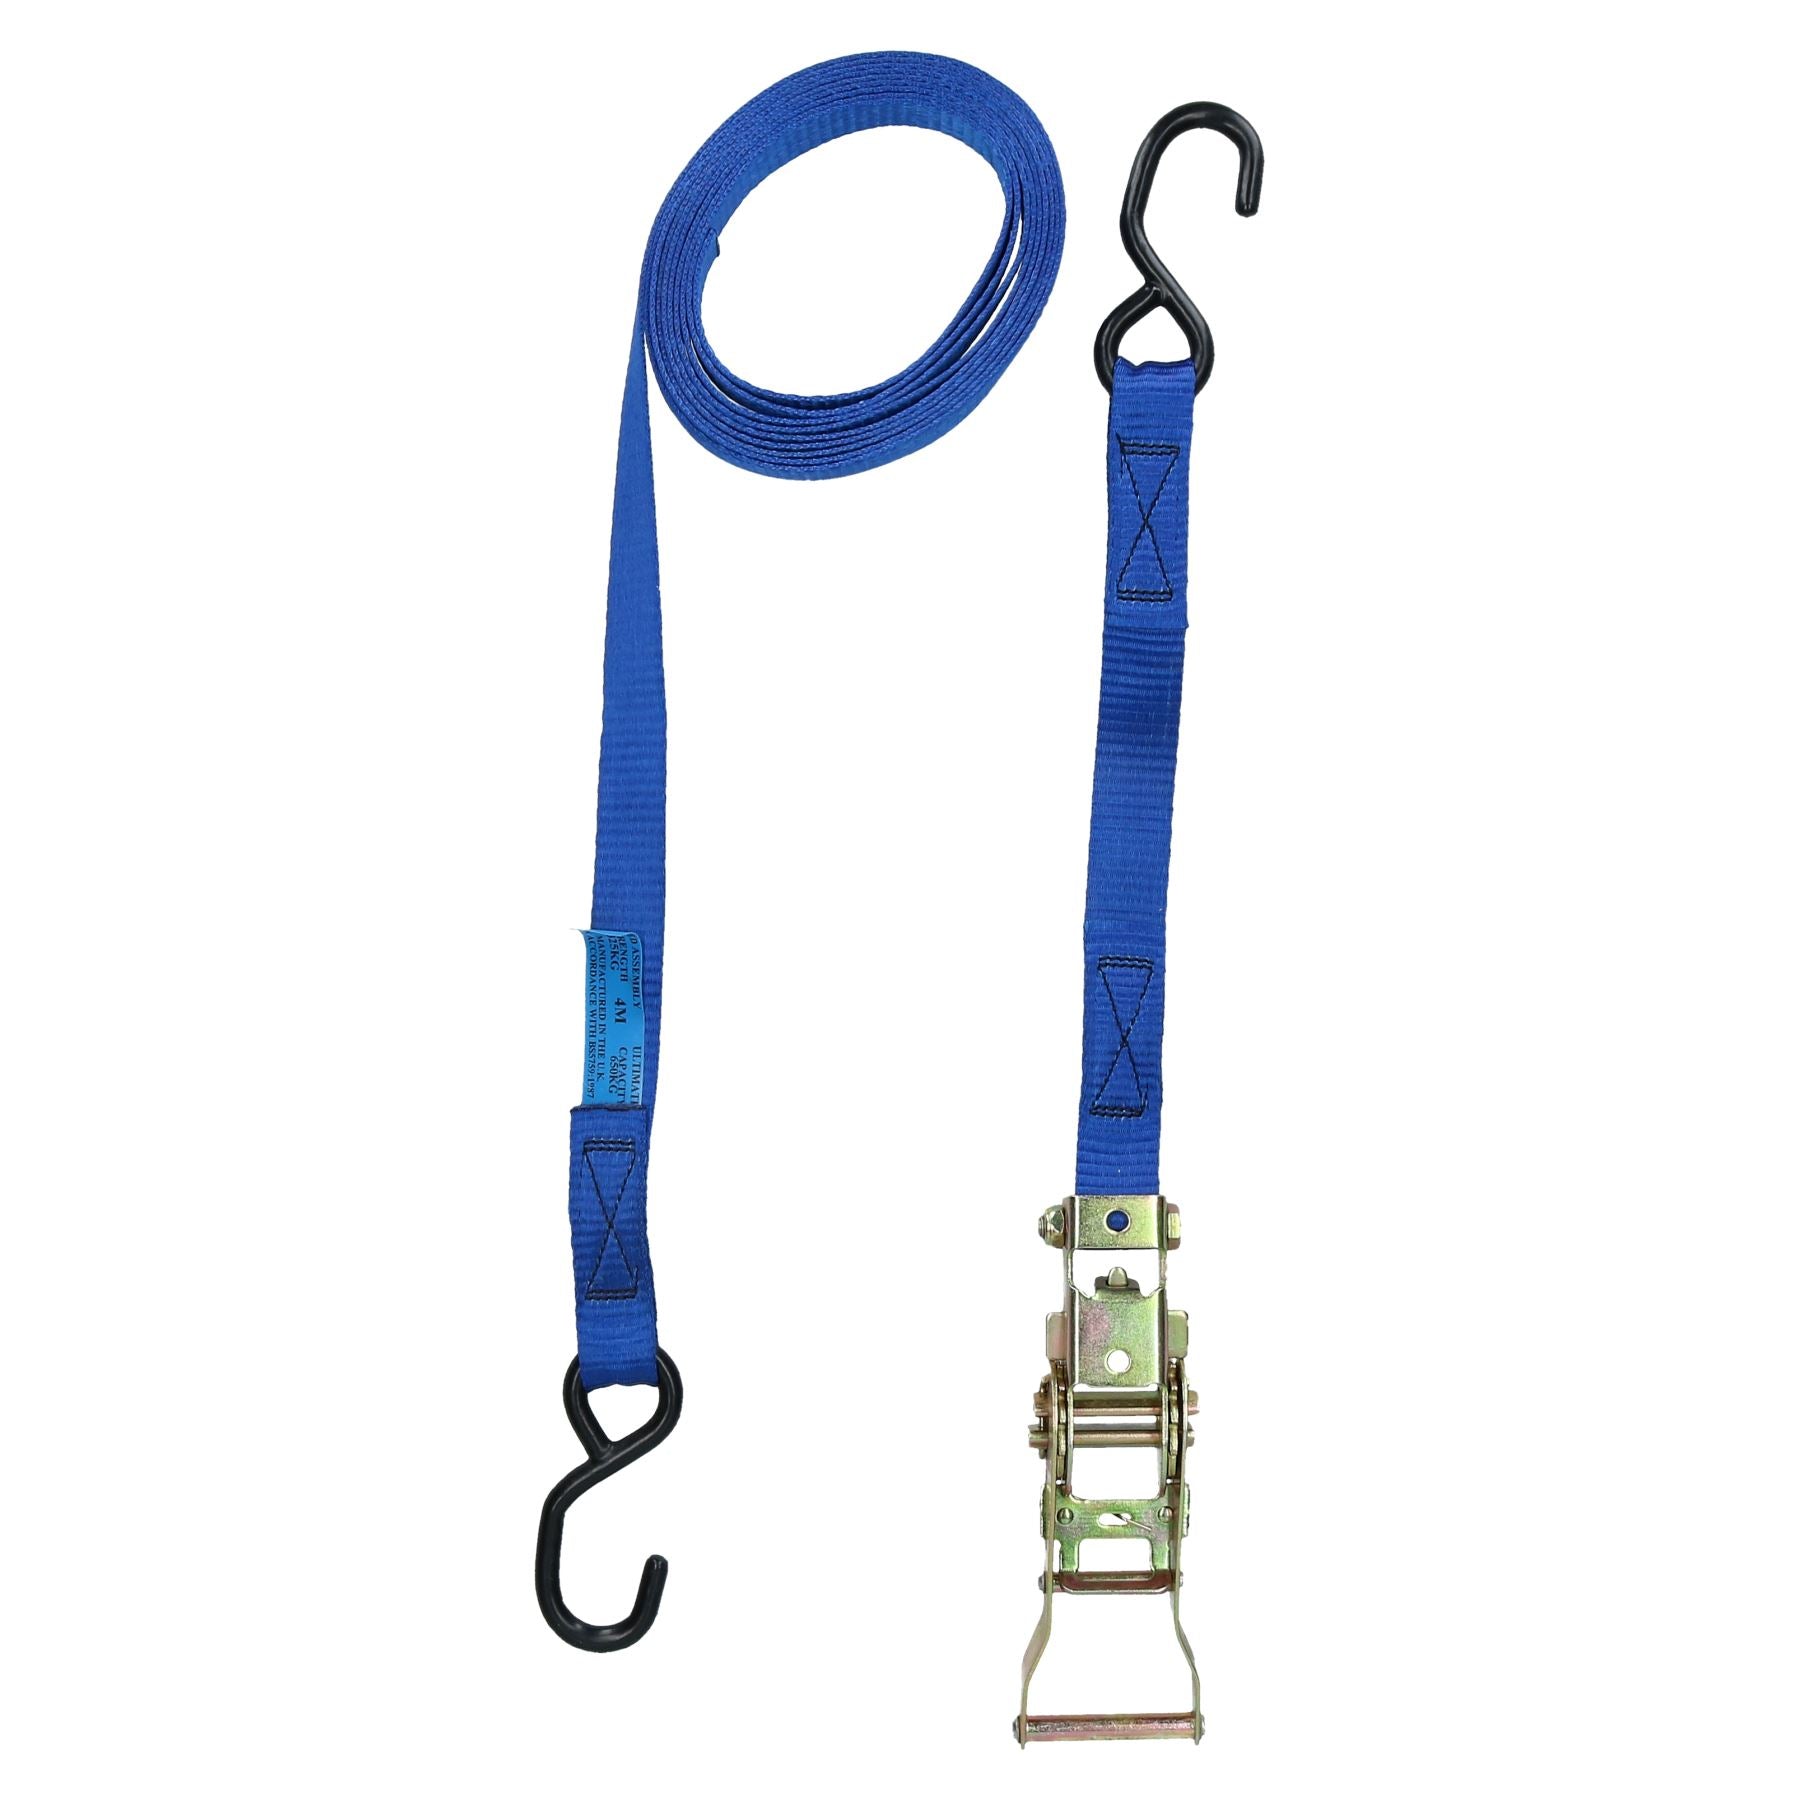 Blue Ratchet Strap Tie Down Trailer 4m Hook Cargo Strap 325kg Recovery